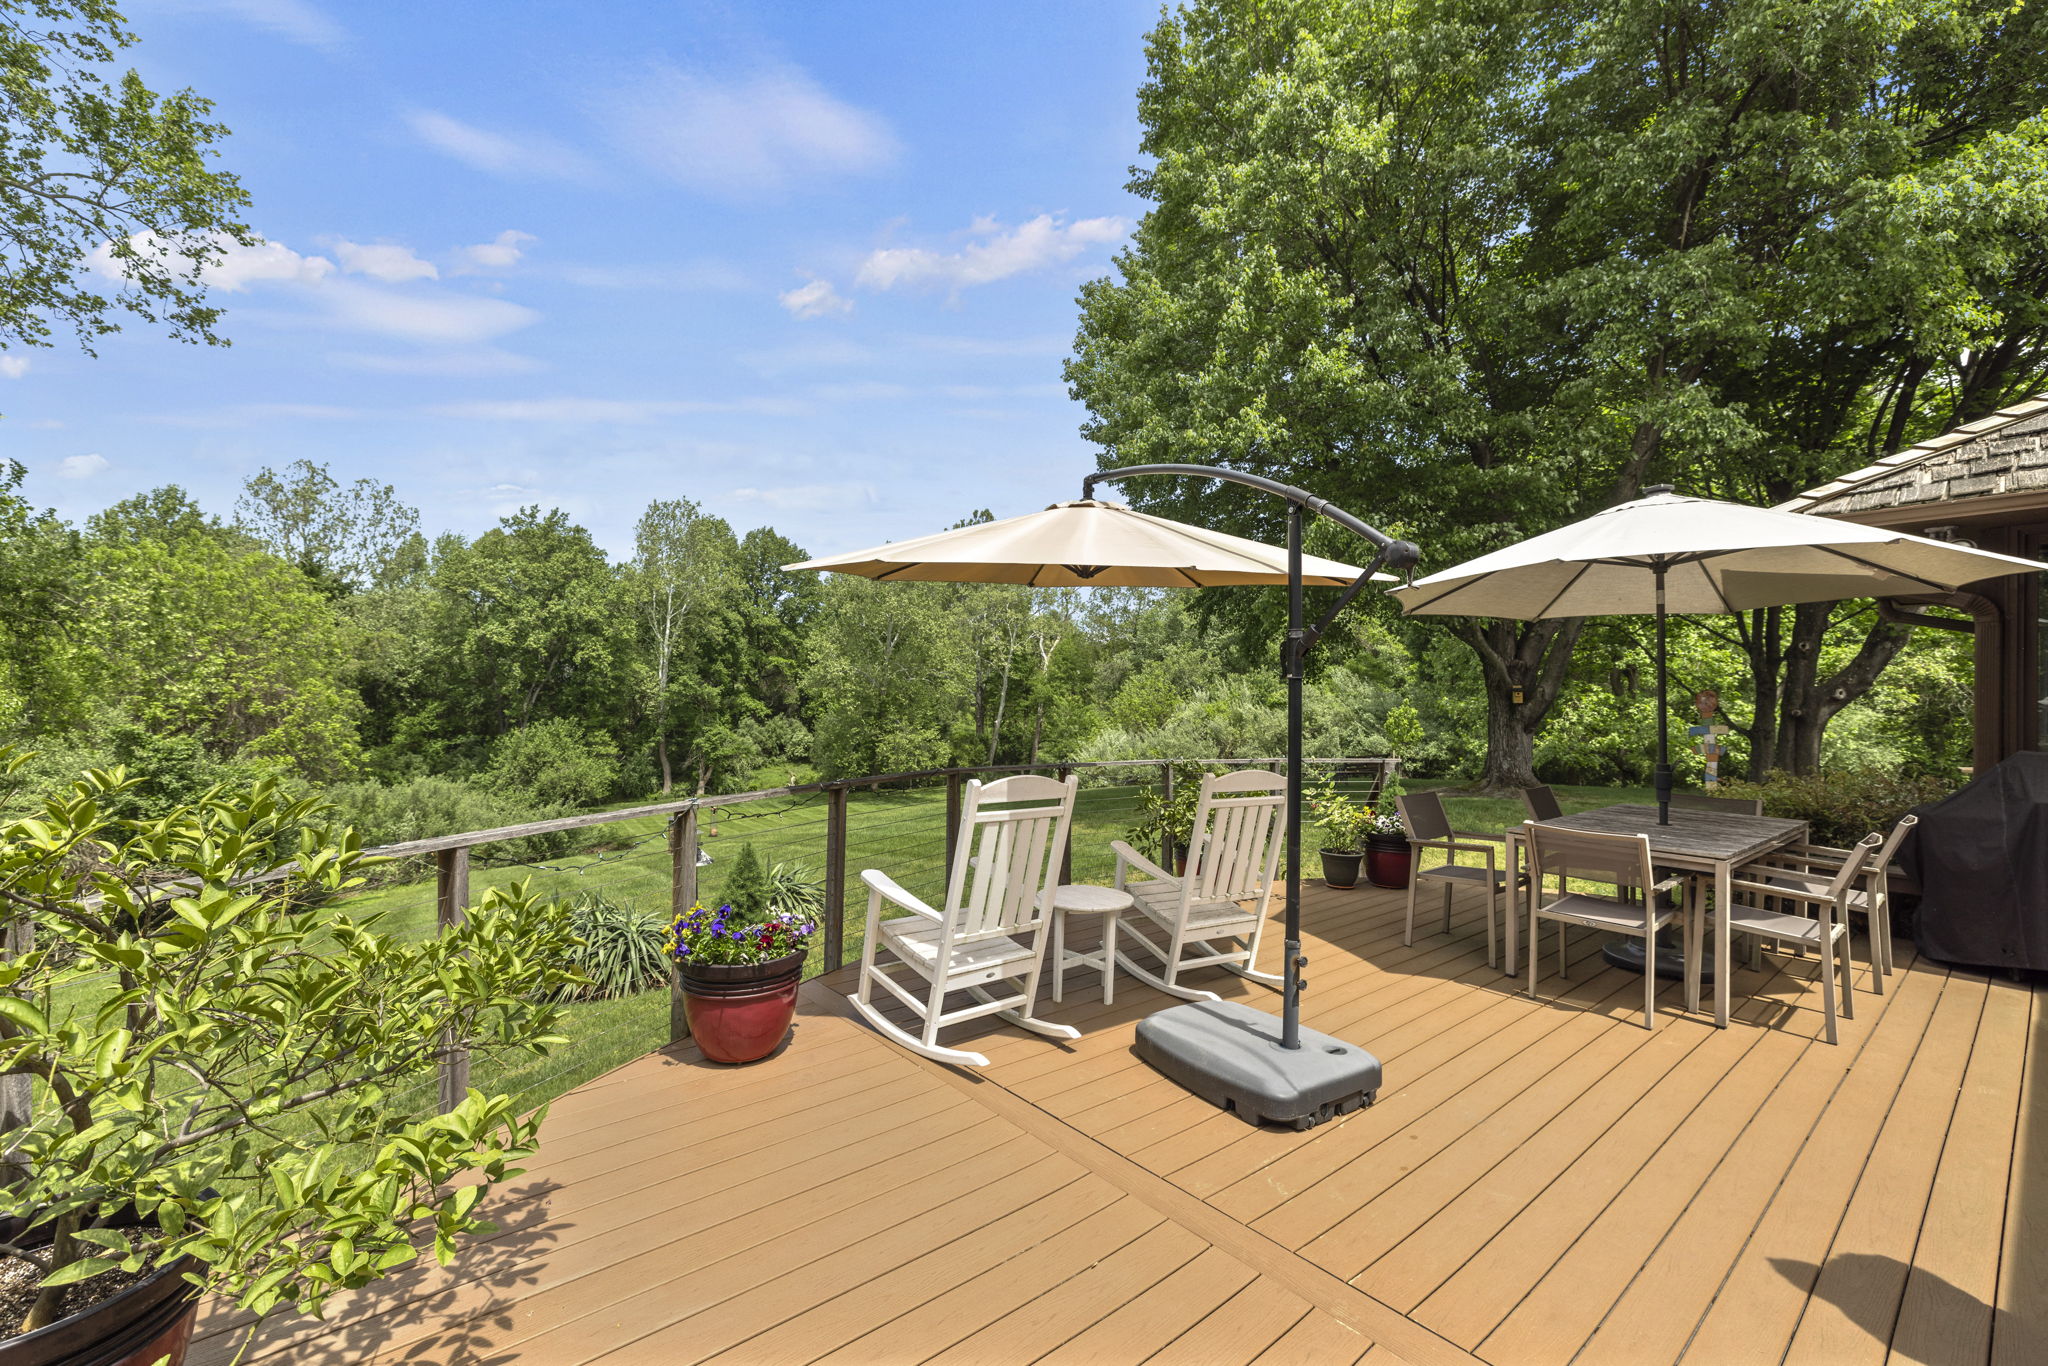 Deck Perfect For Al Fresco Dining